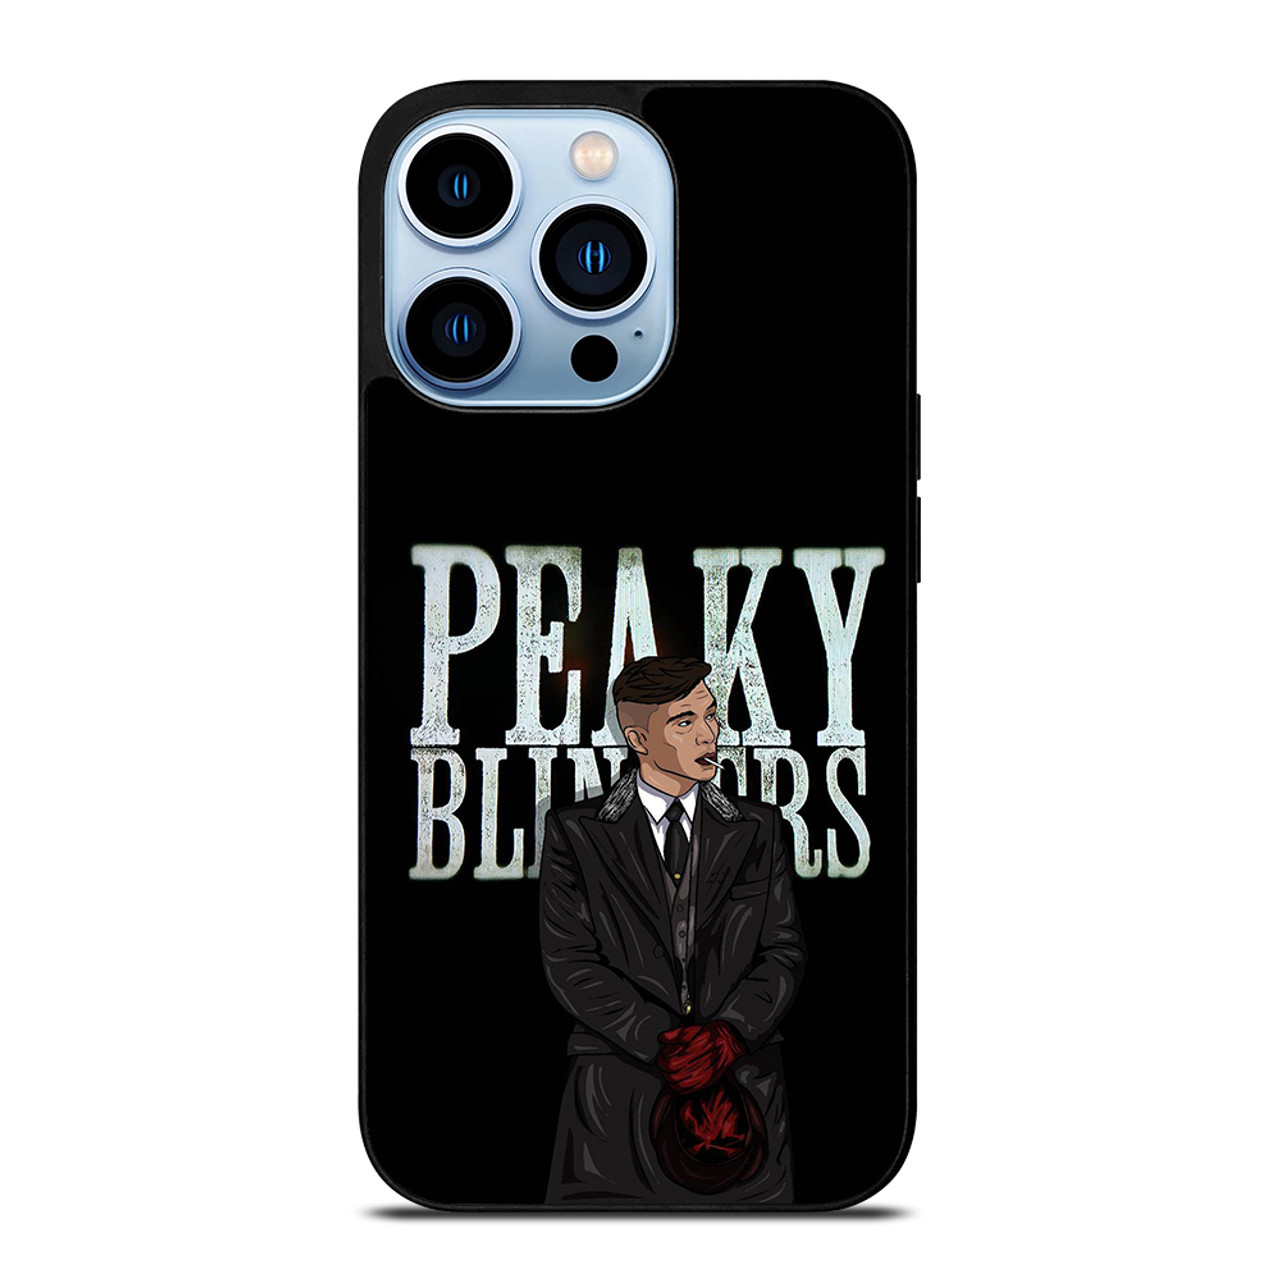 SHELBY PEAKY BLINDERS ART iPhone 13 Pro Max Case